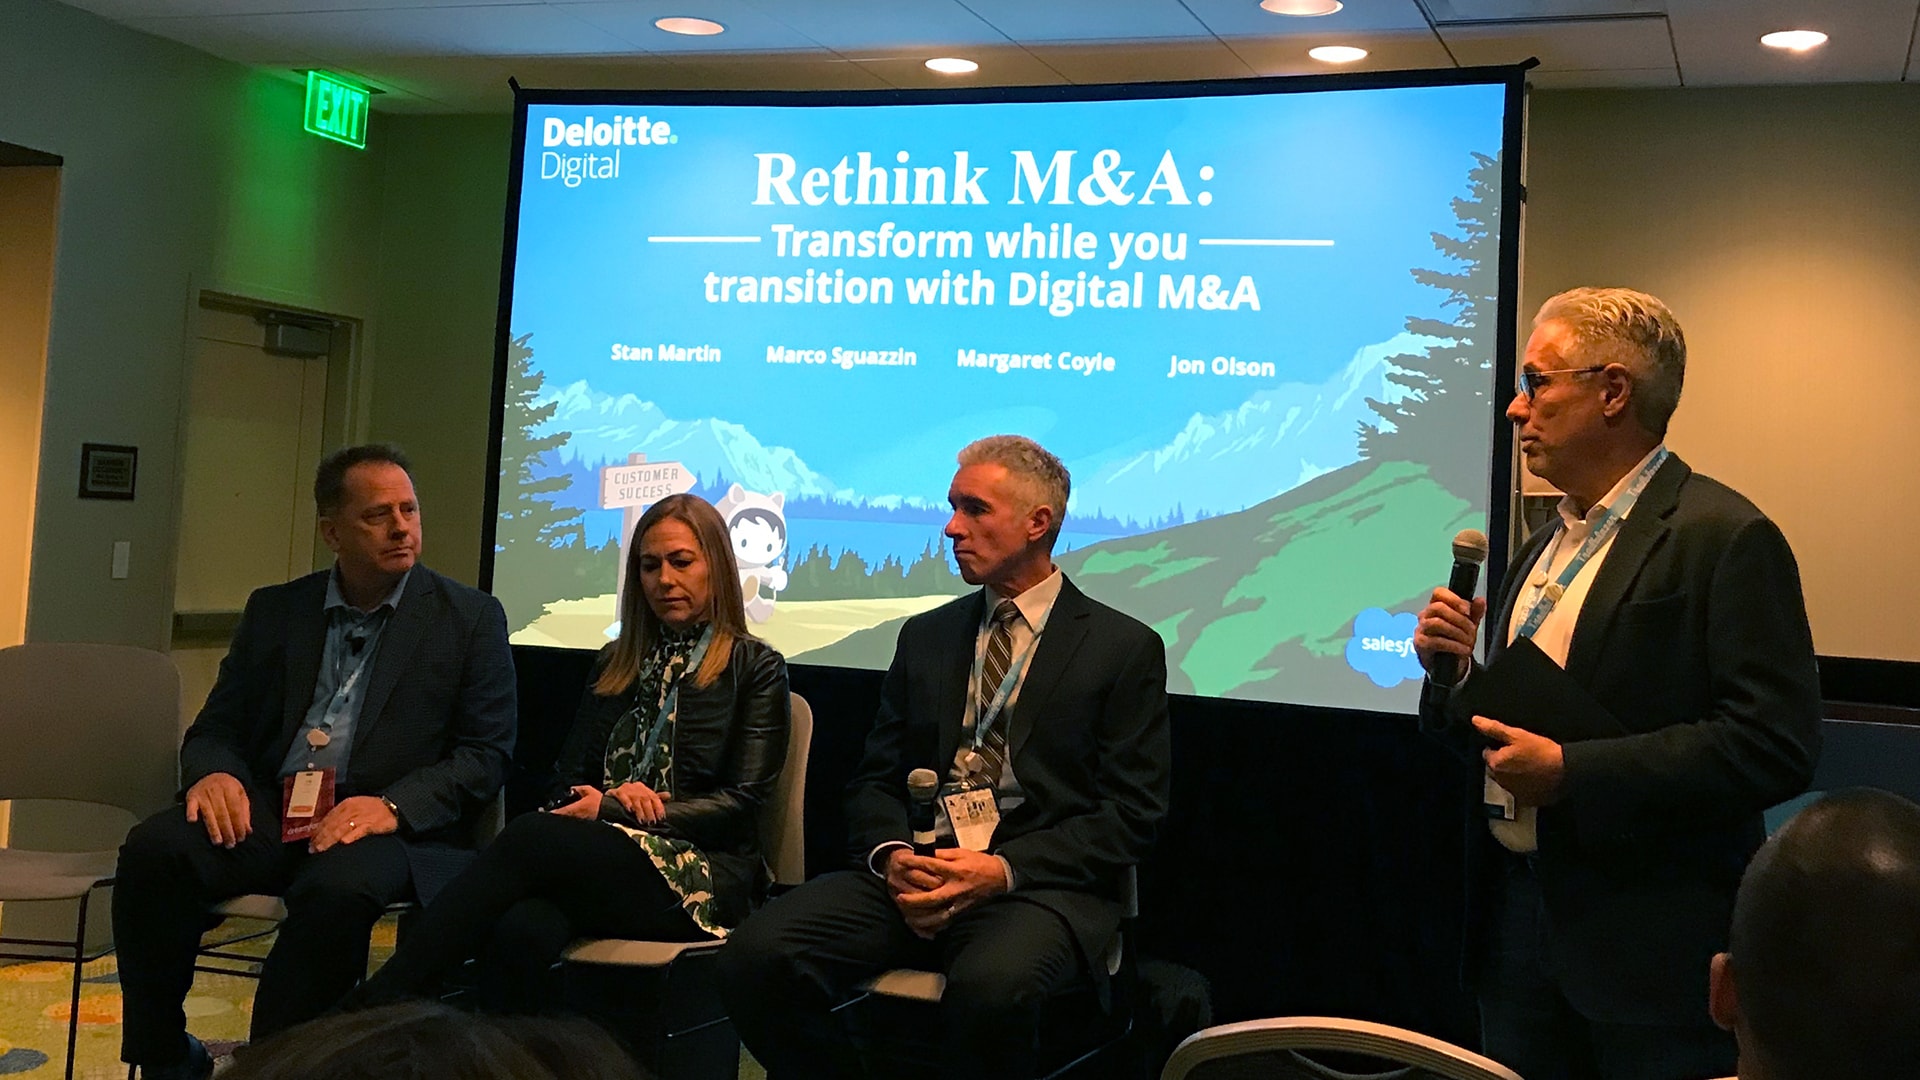 Four people giving presentation on Rethinking M&A at Dreamforce